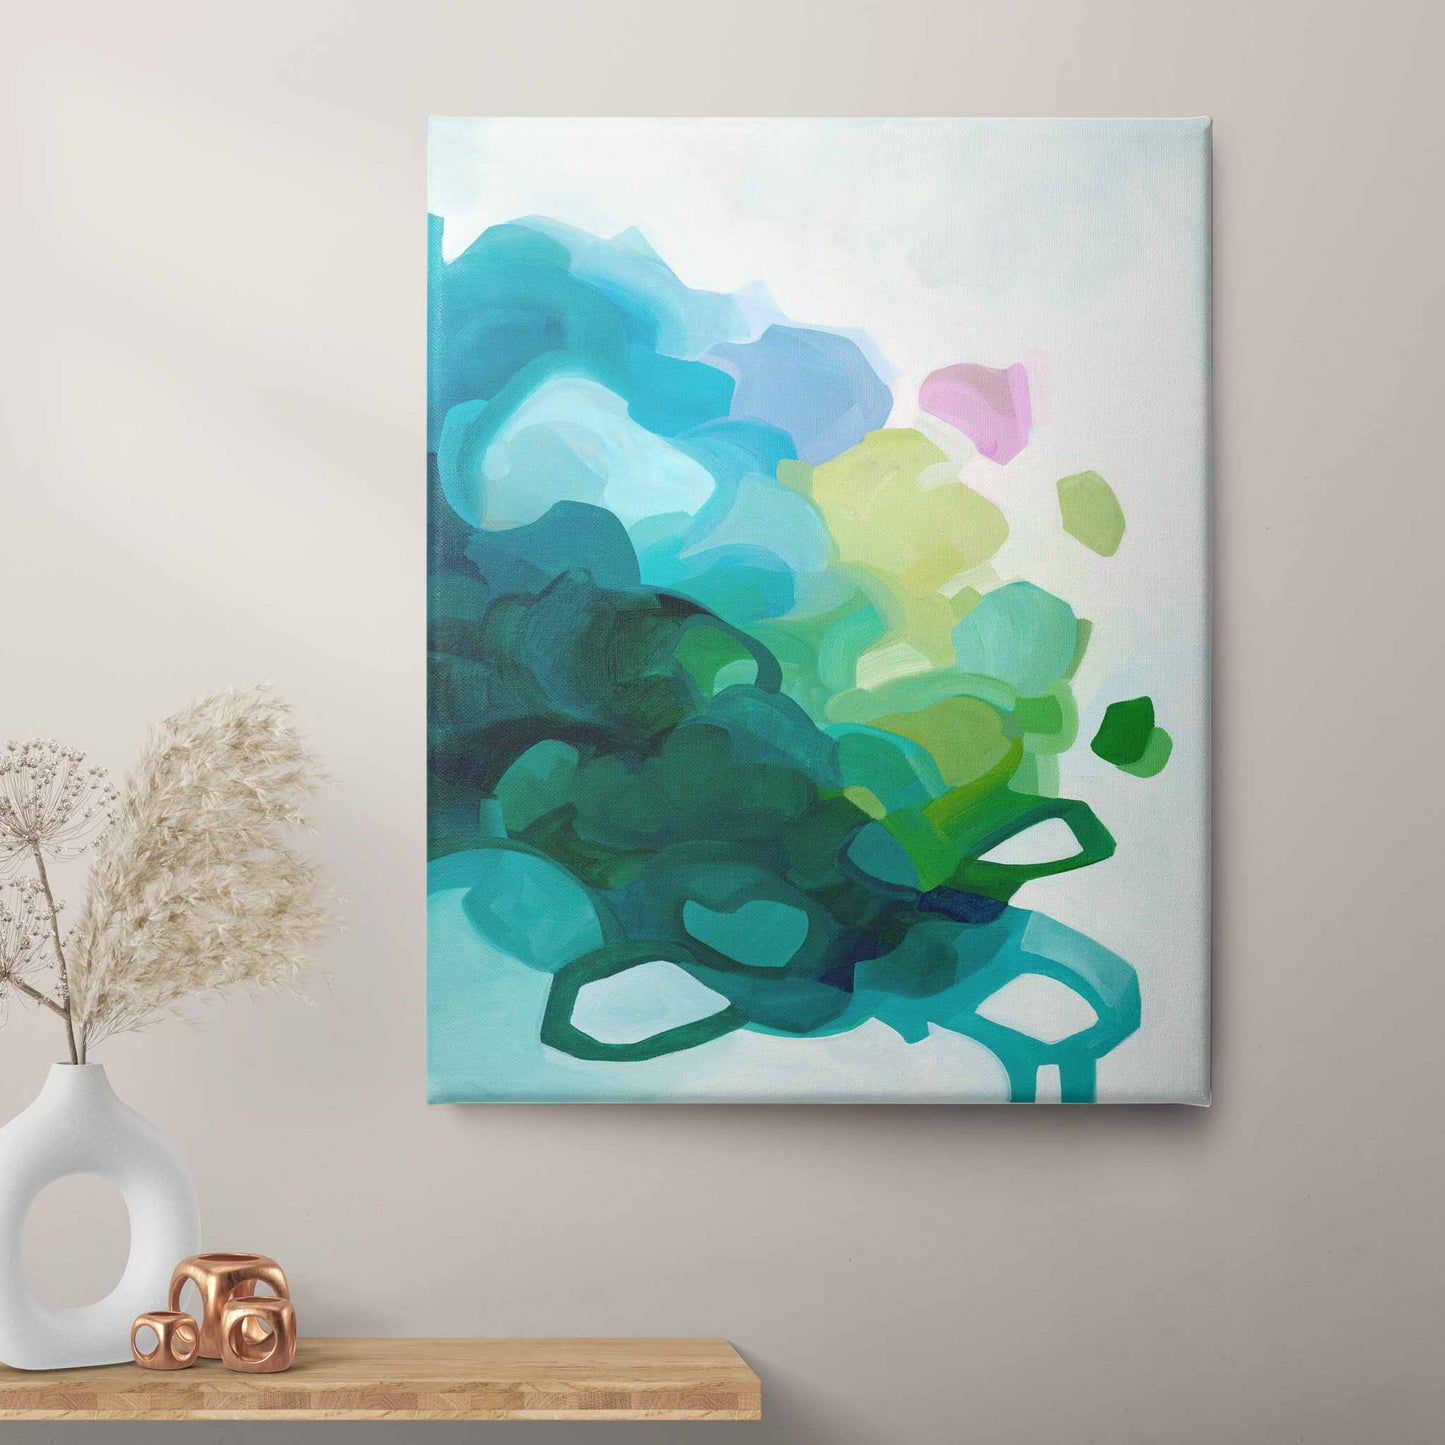 16x20 vertical canvas wall art of a teal and light blue abstract painting